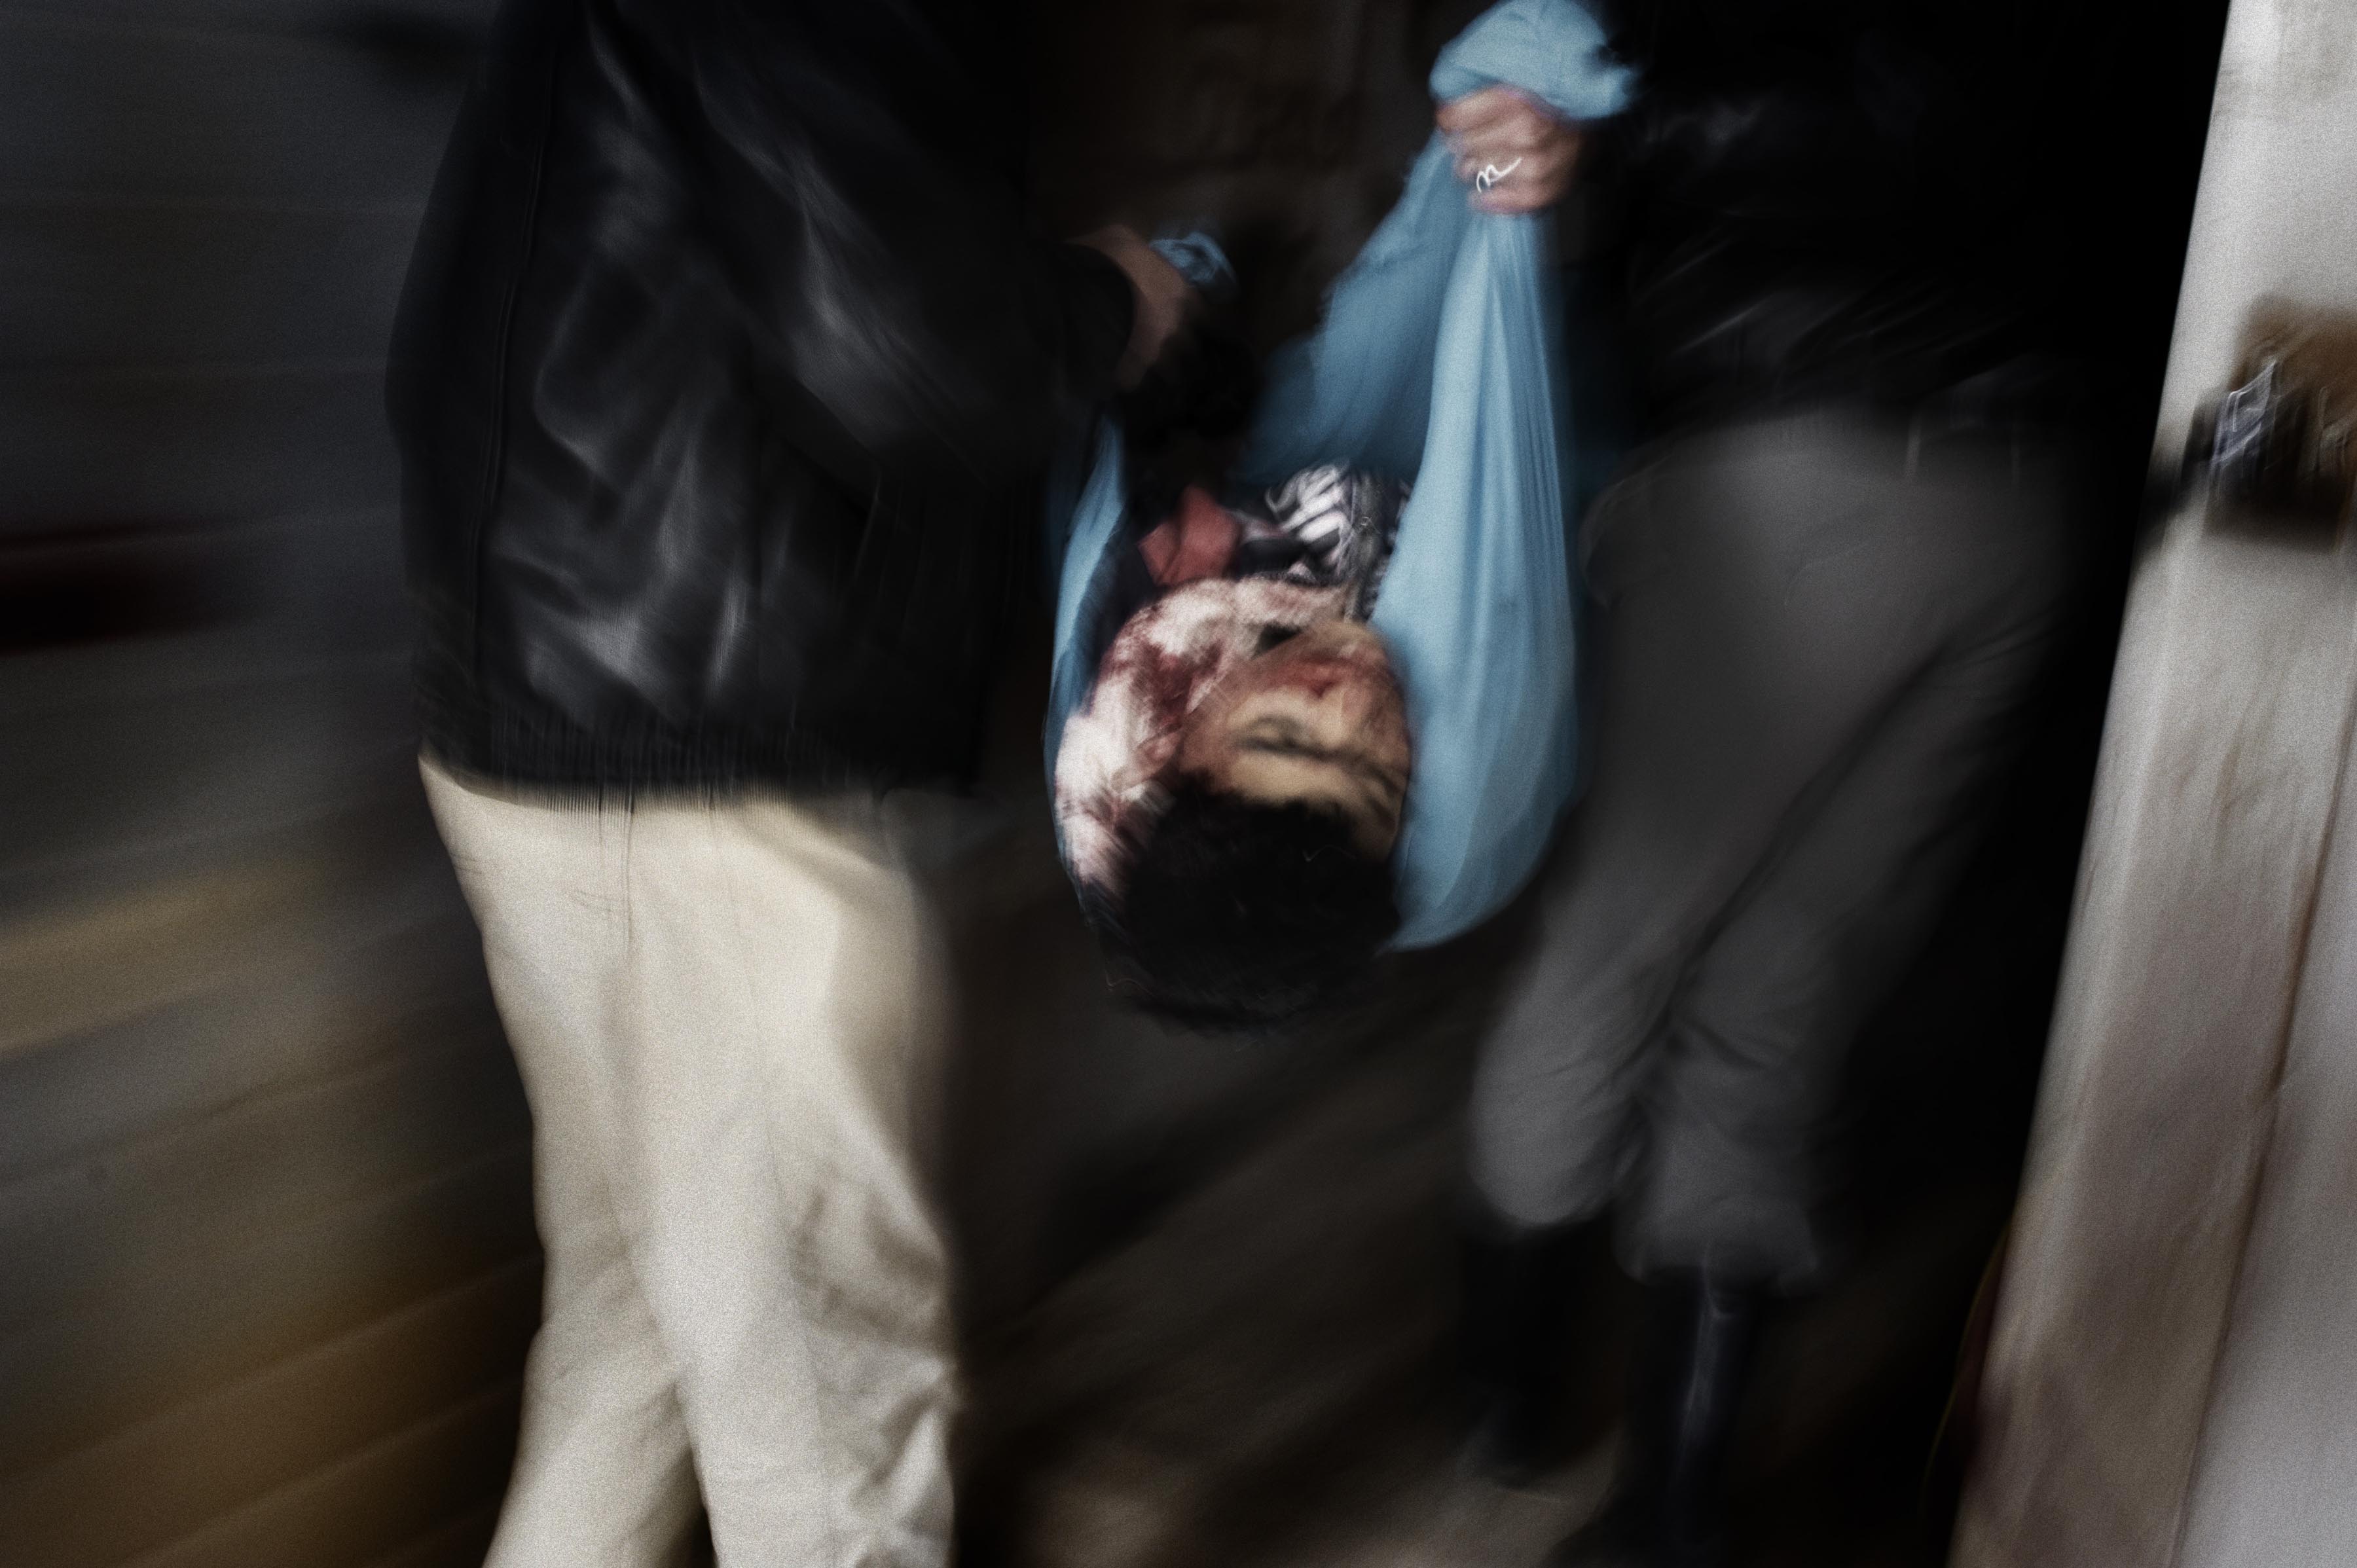 Feb. 20, 2012. Two Syrian men carry the body of a child who has been killed by an Al Assad army mortar in Homs Province.